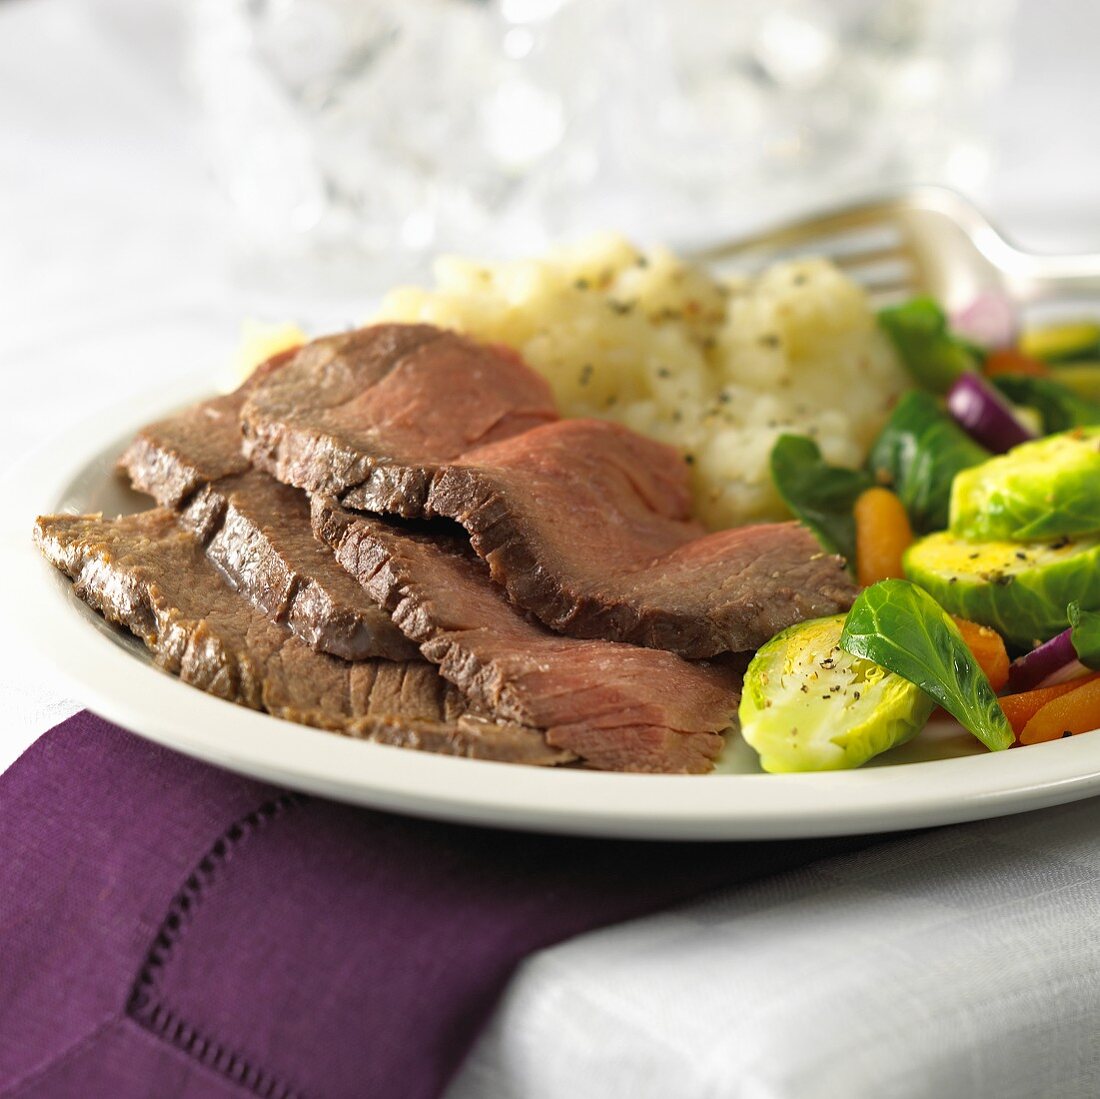 Four slices of roast beef with potato salad & Brussels sprouts